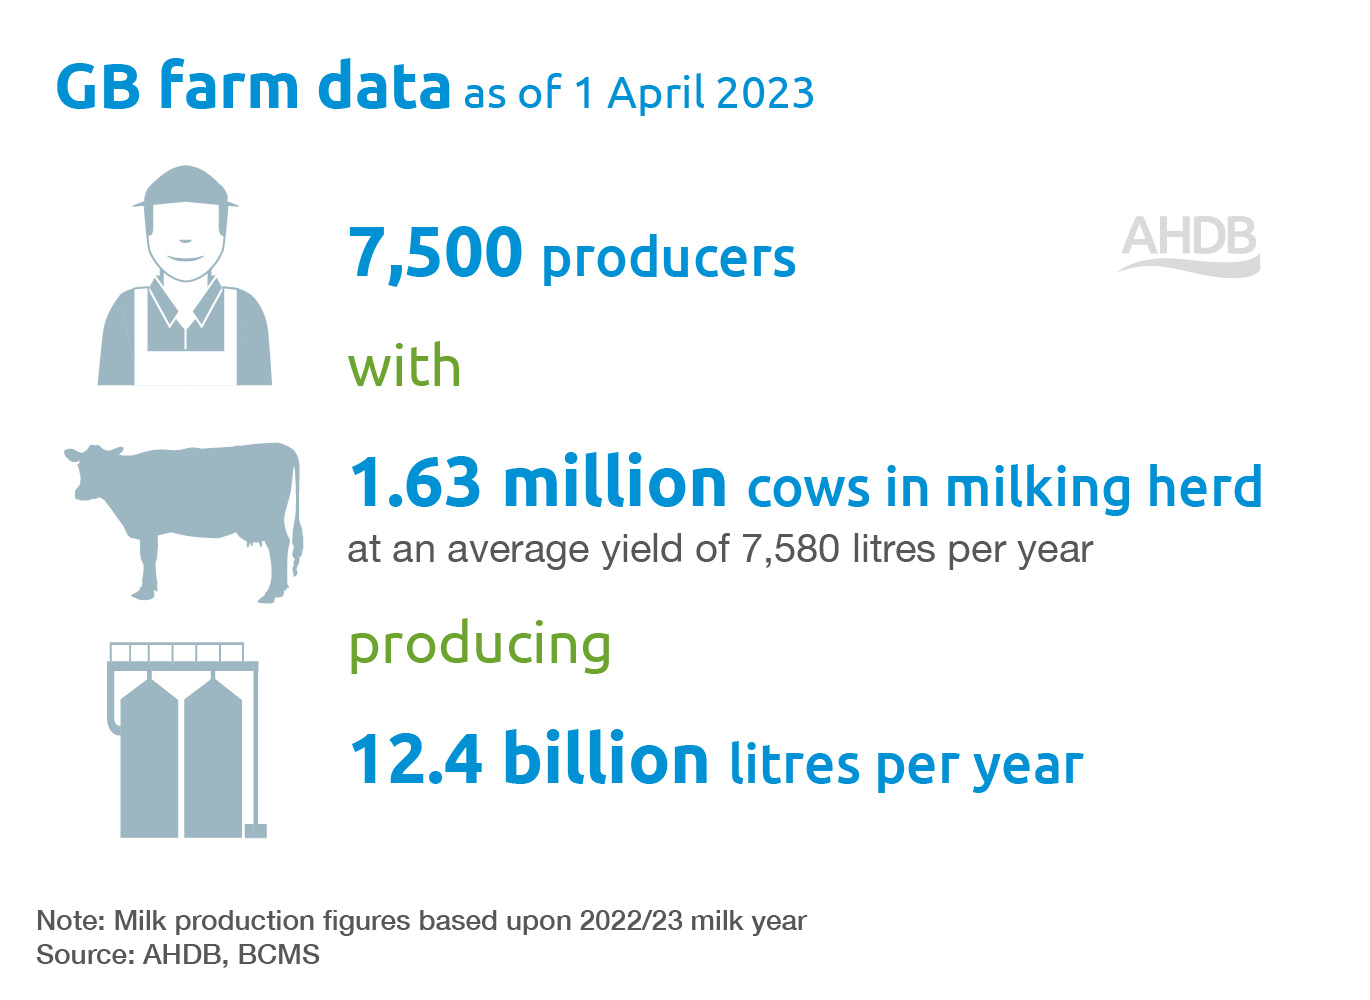 GB farm data April 2023 - producers, cows in a milking herd and litres of milk produced per year.